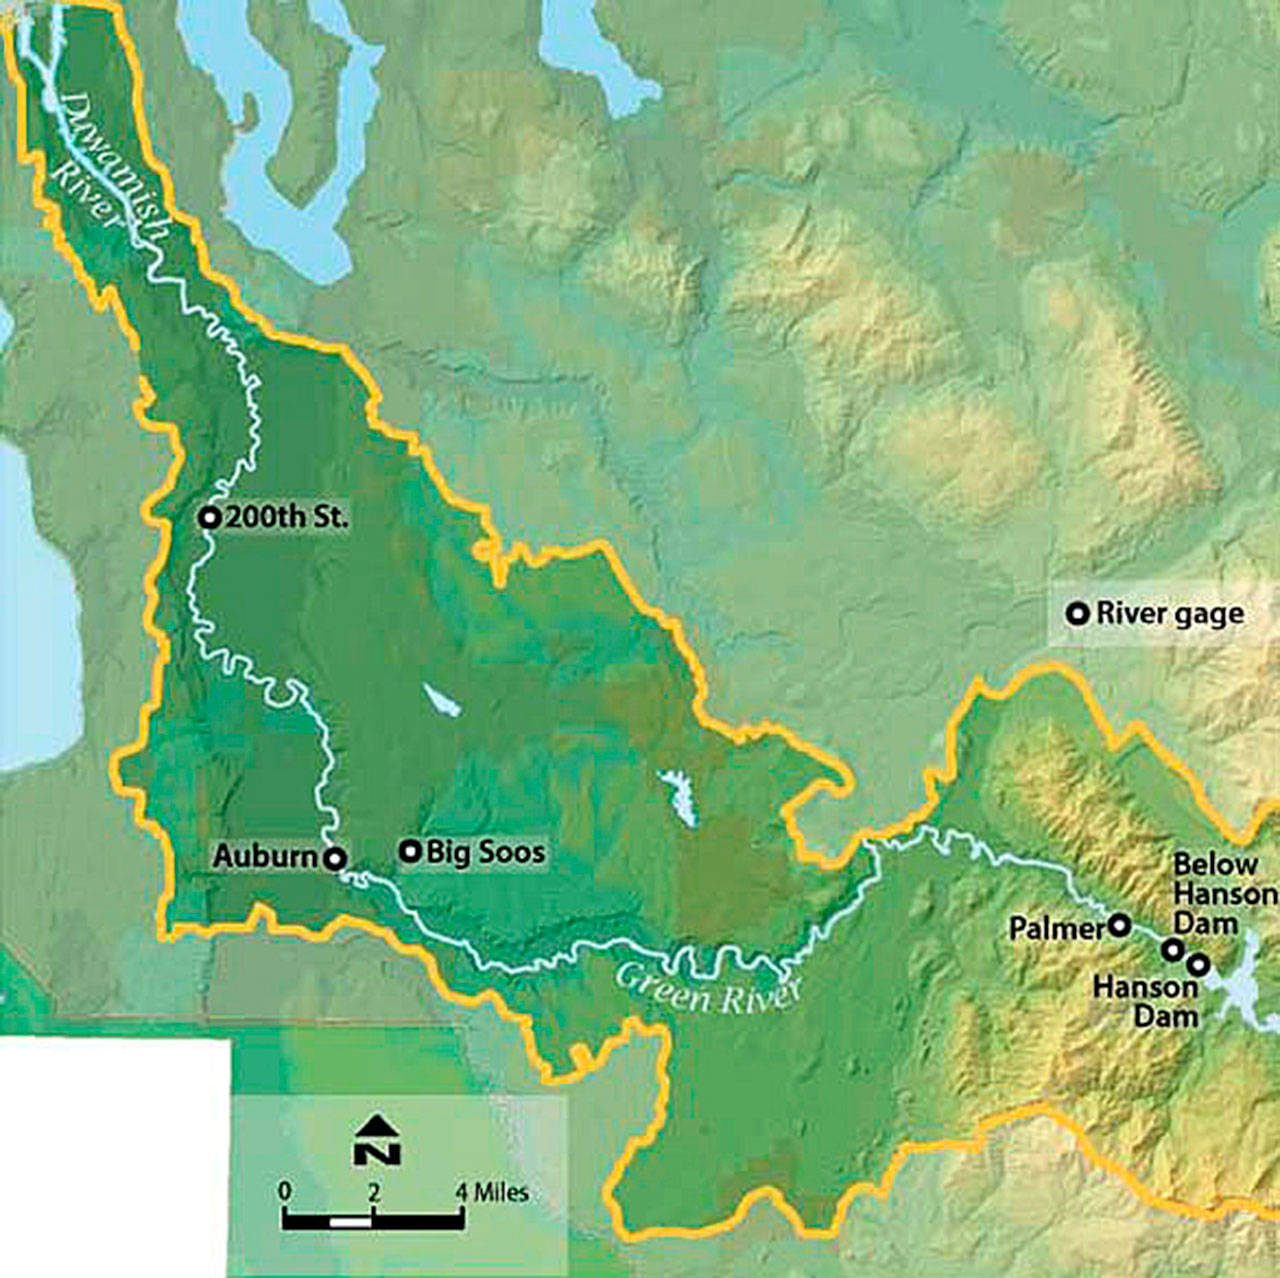 This King County map of the Green River shows where gages are to monitor levels starting at the Howard Hanson Dam. COURTESY GRAPHIC, King County